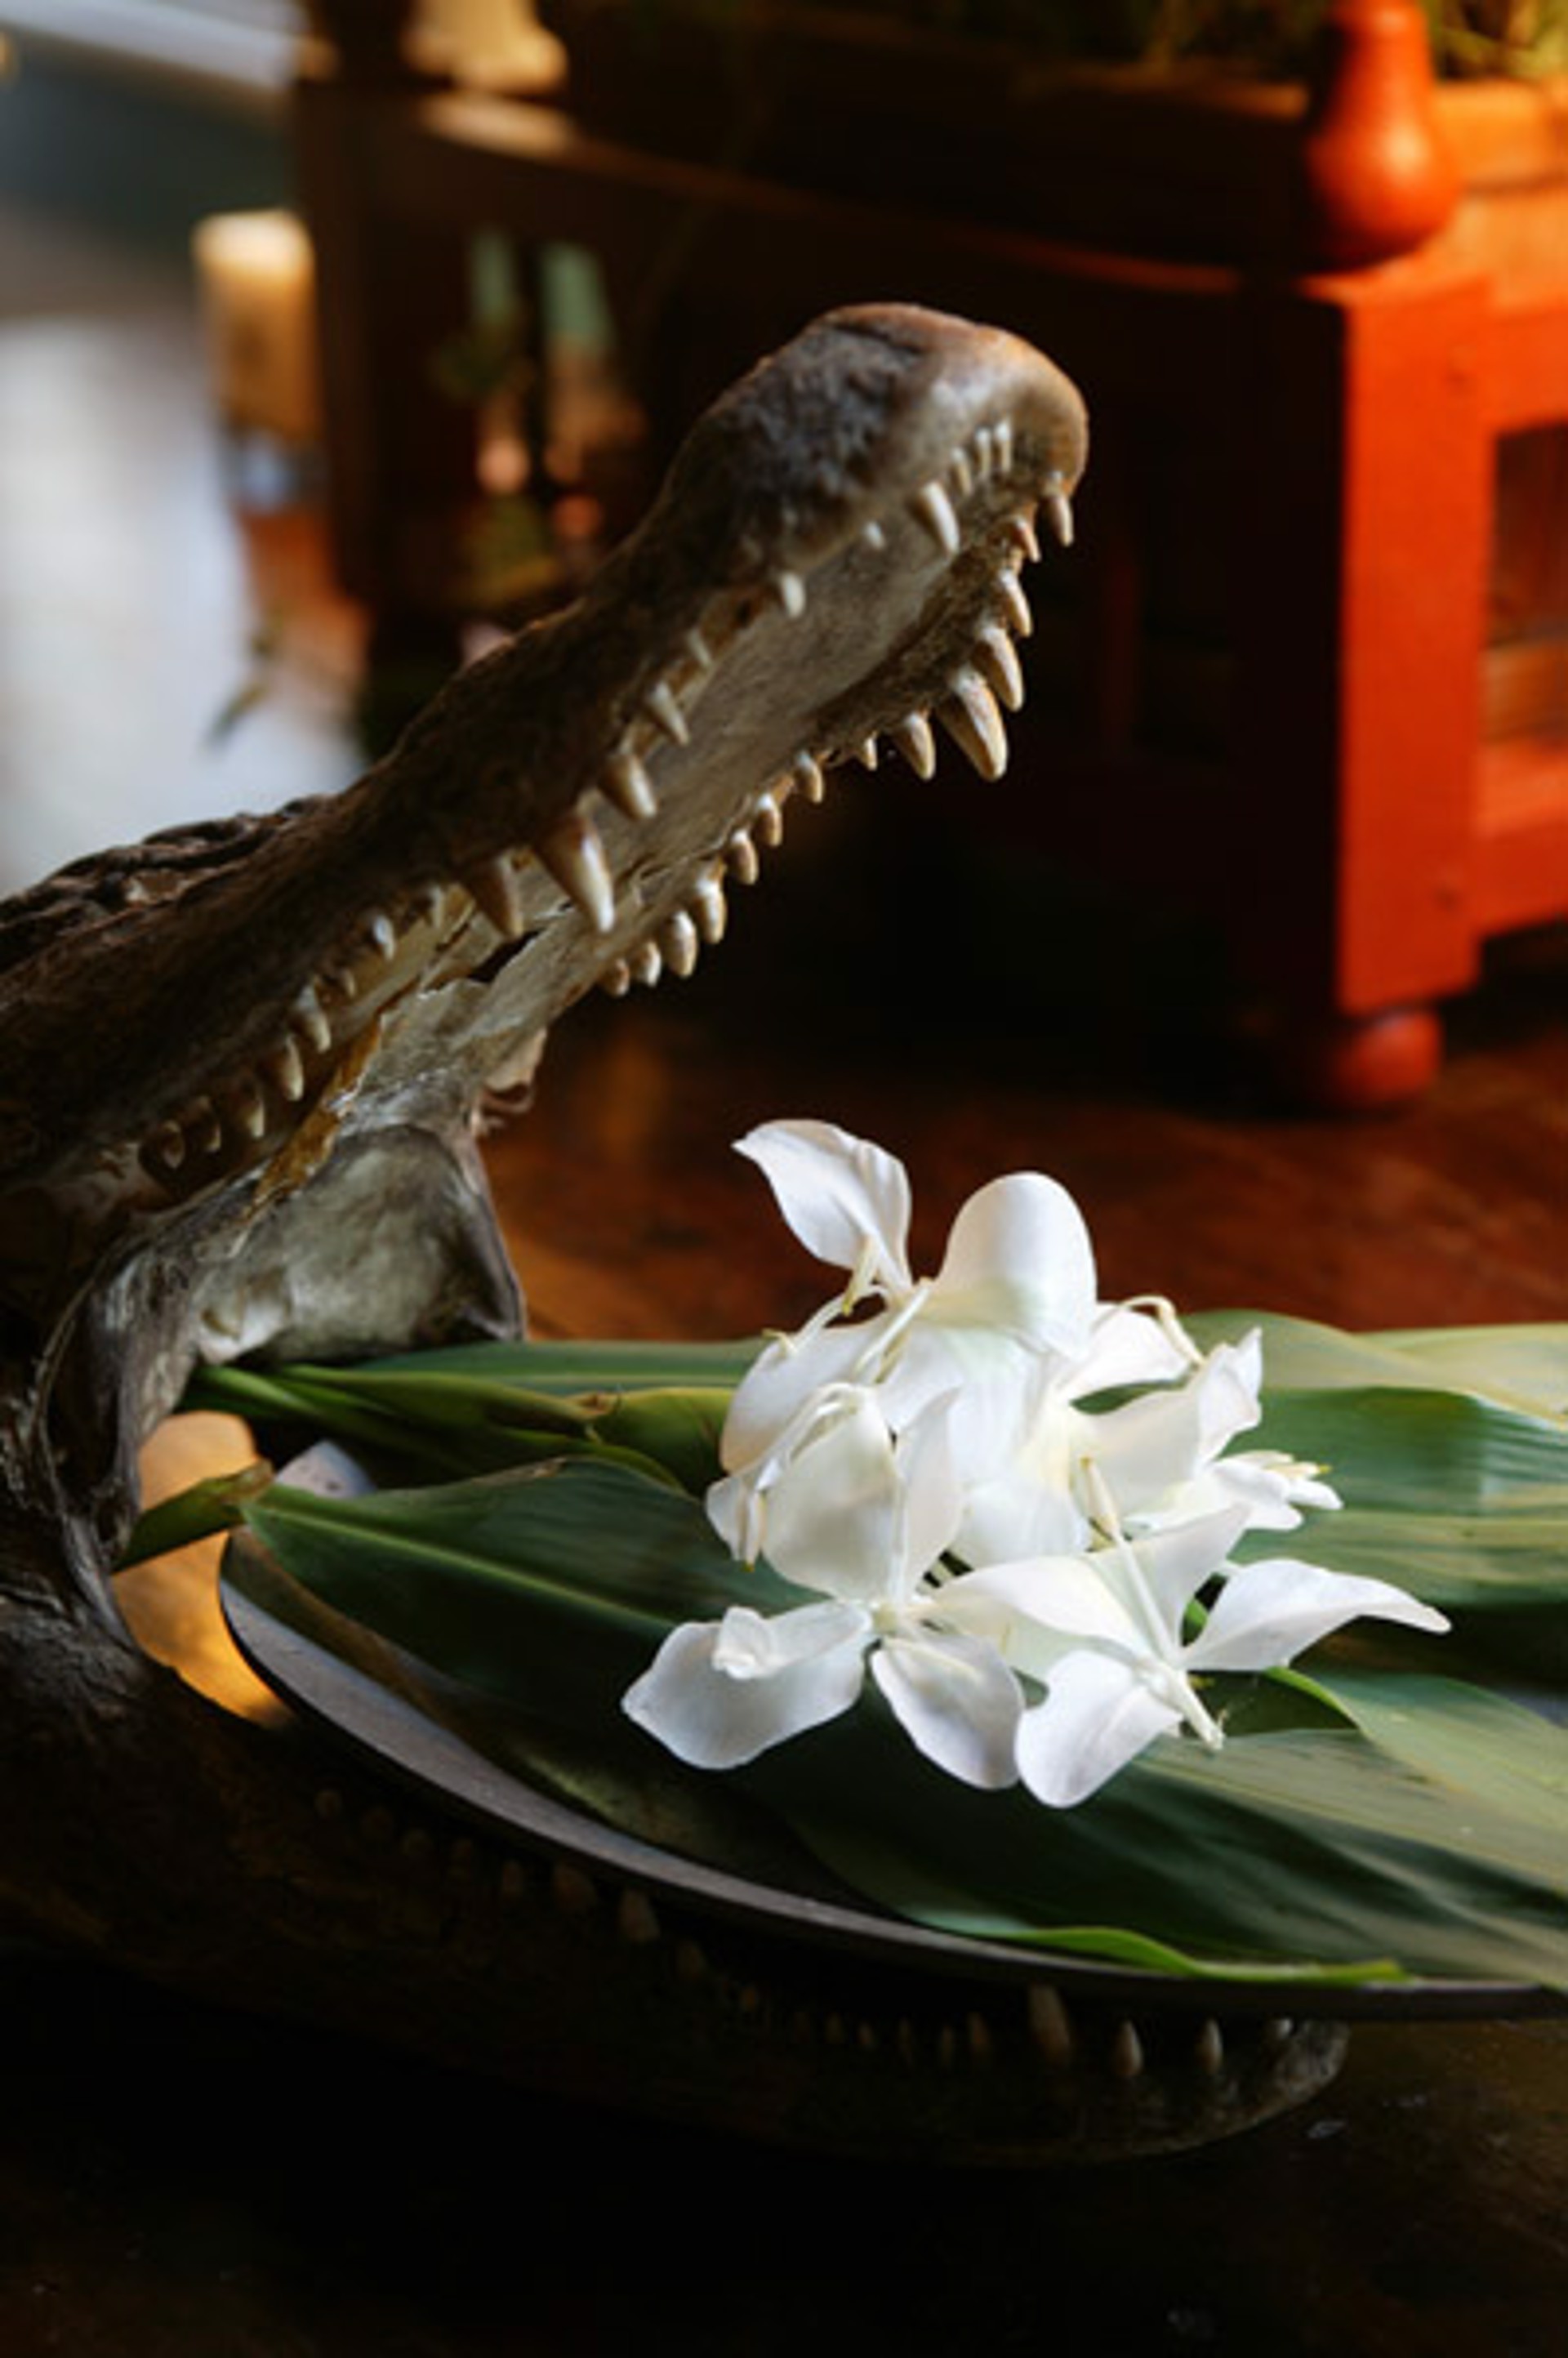 Gator Mouth and Magnolia by Philip Gould